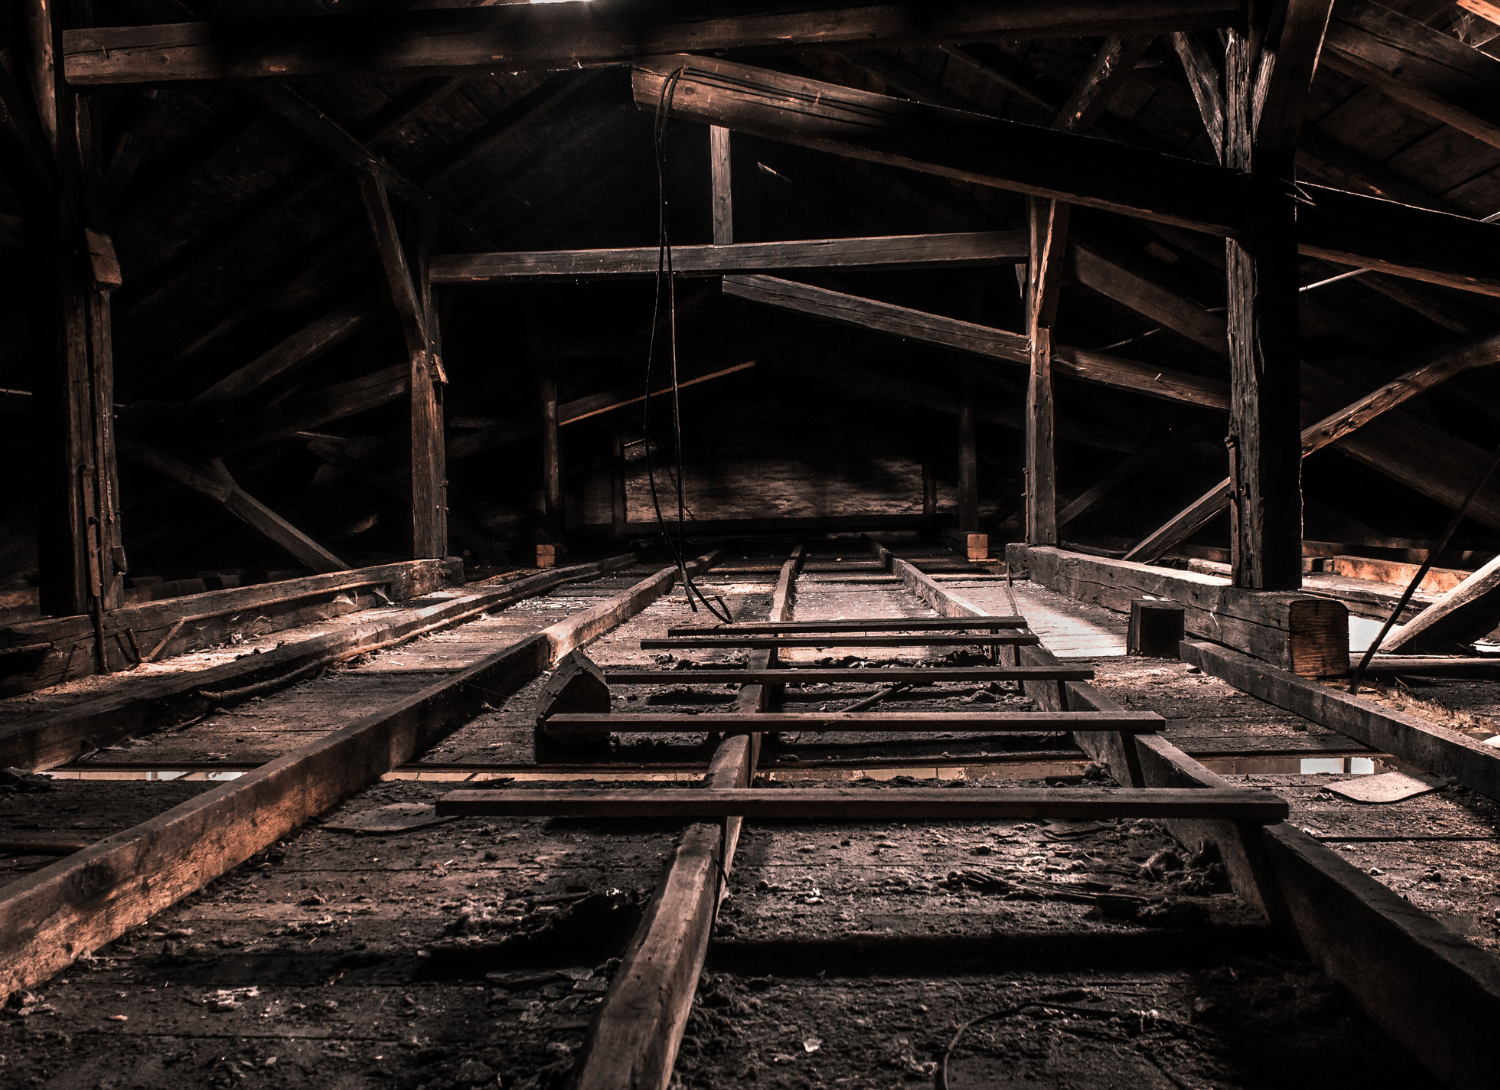 Dirty attic with exposed beams